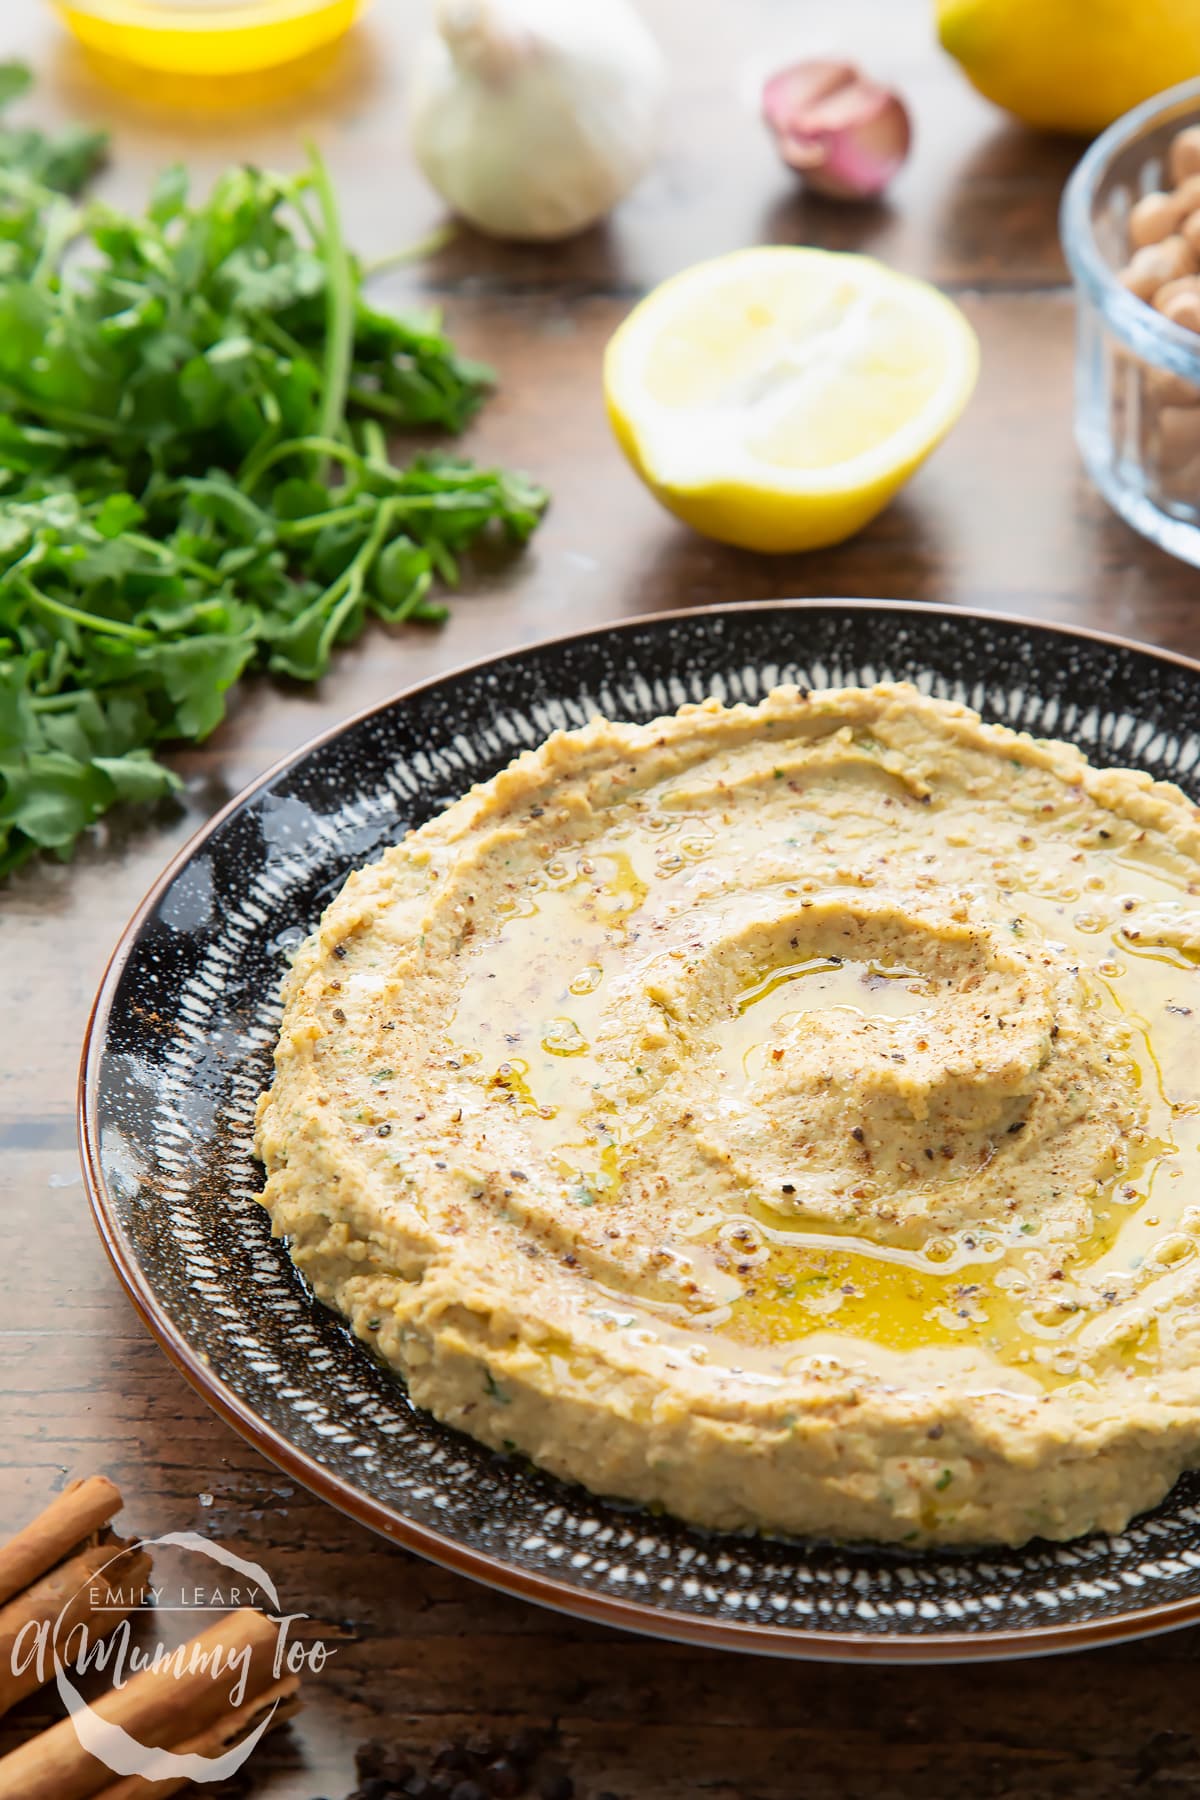 Cinnamon hummus spread in a shallow black and white bowl. It has been seasoned with cinnamon and olive oil